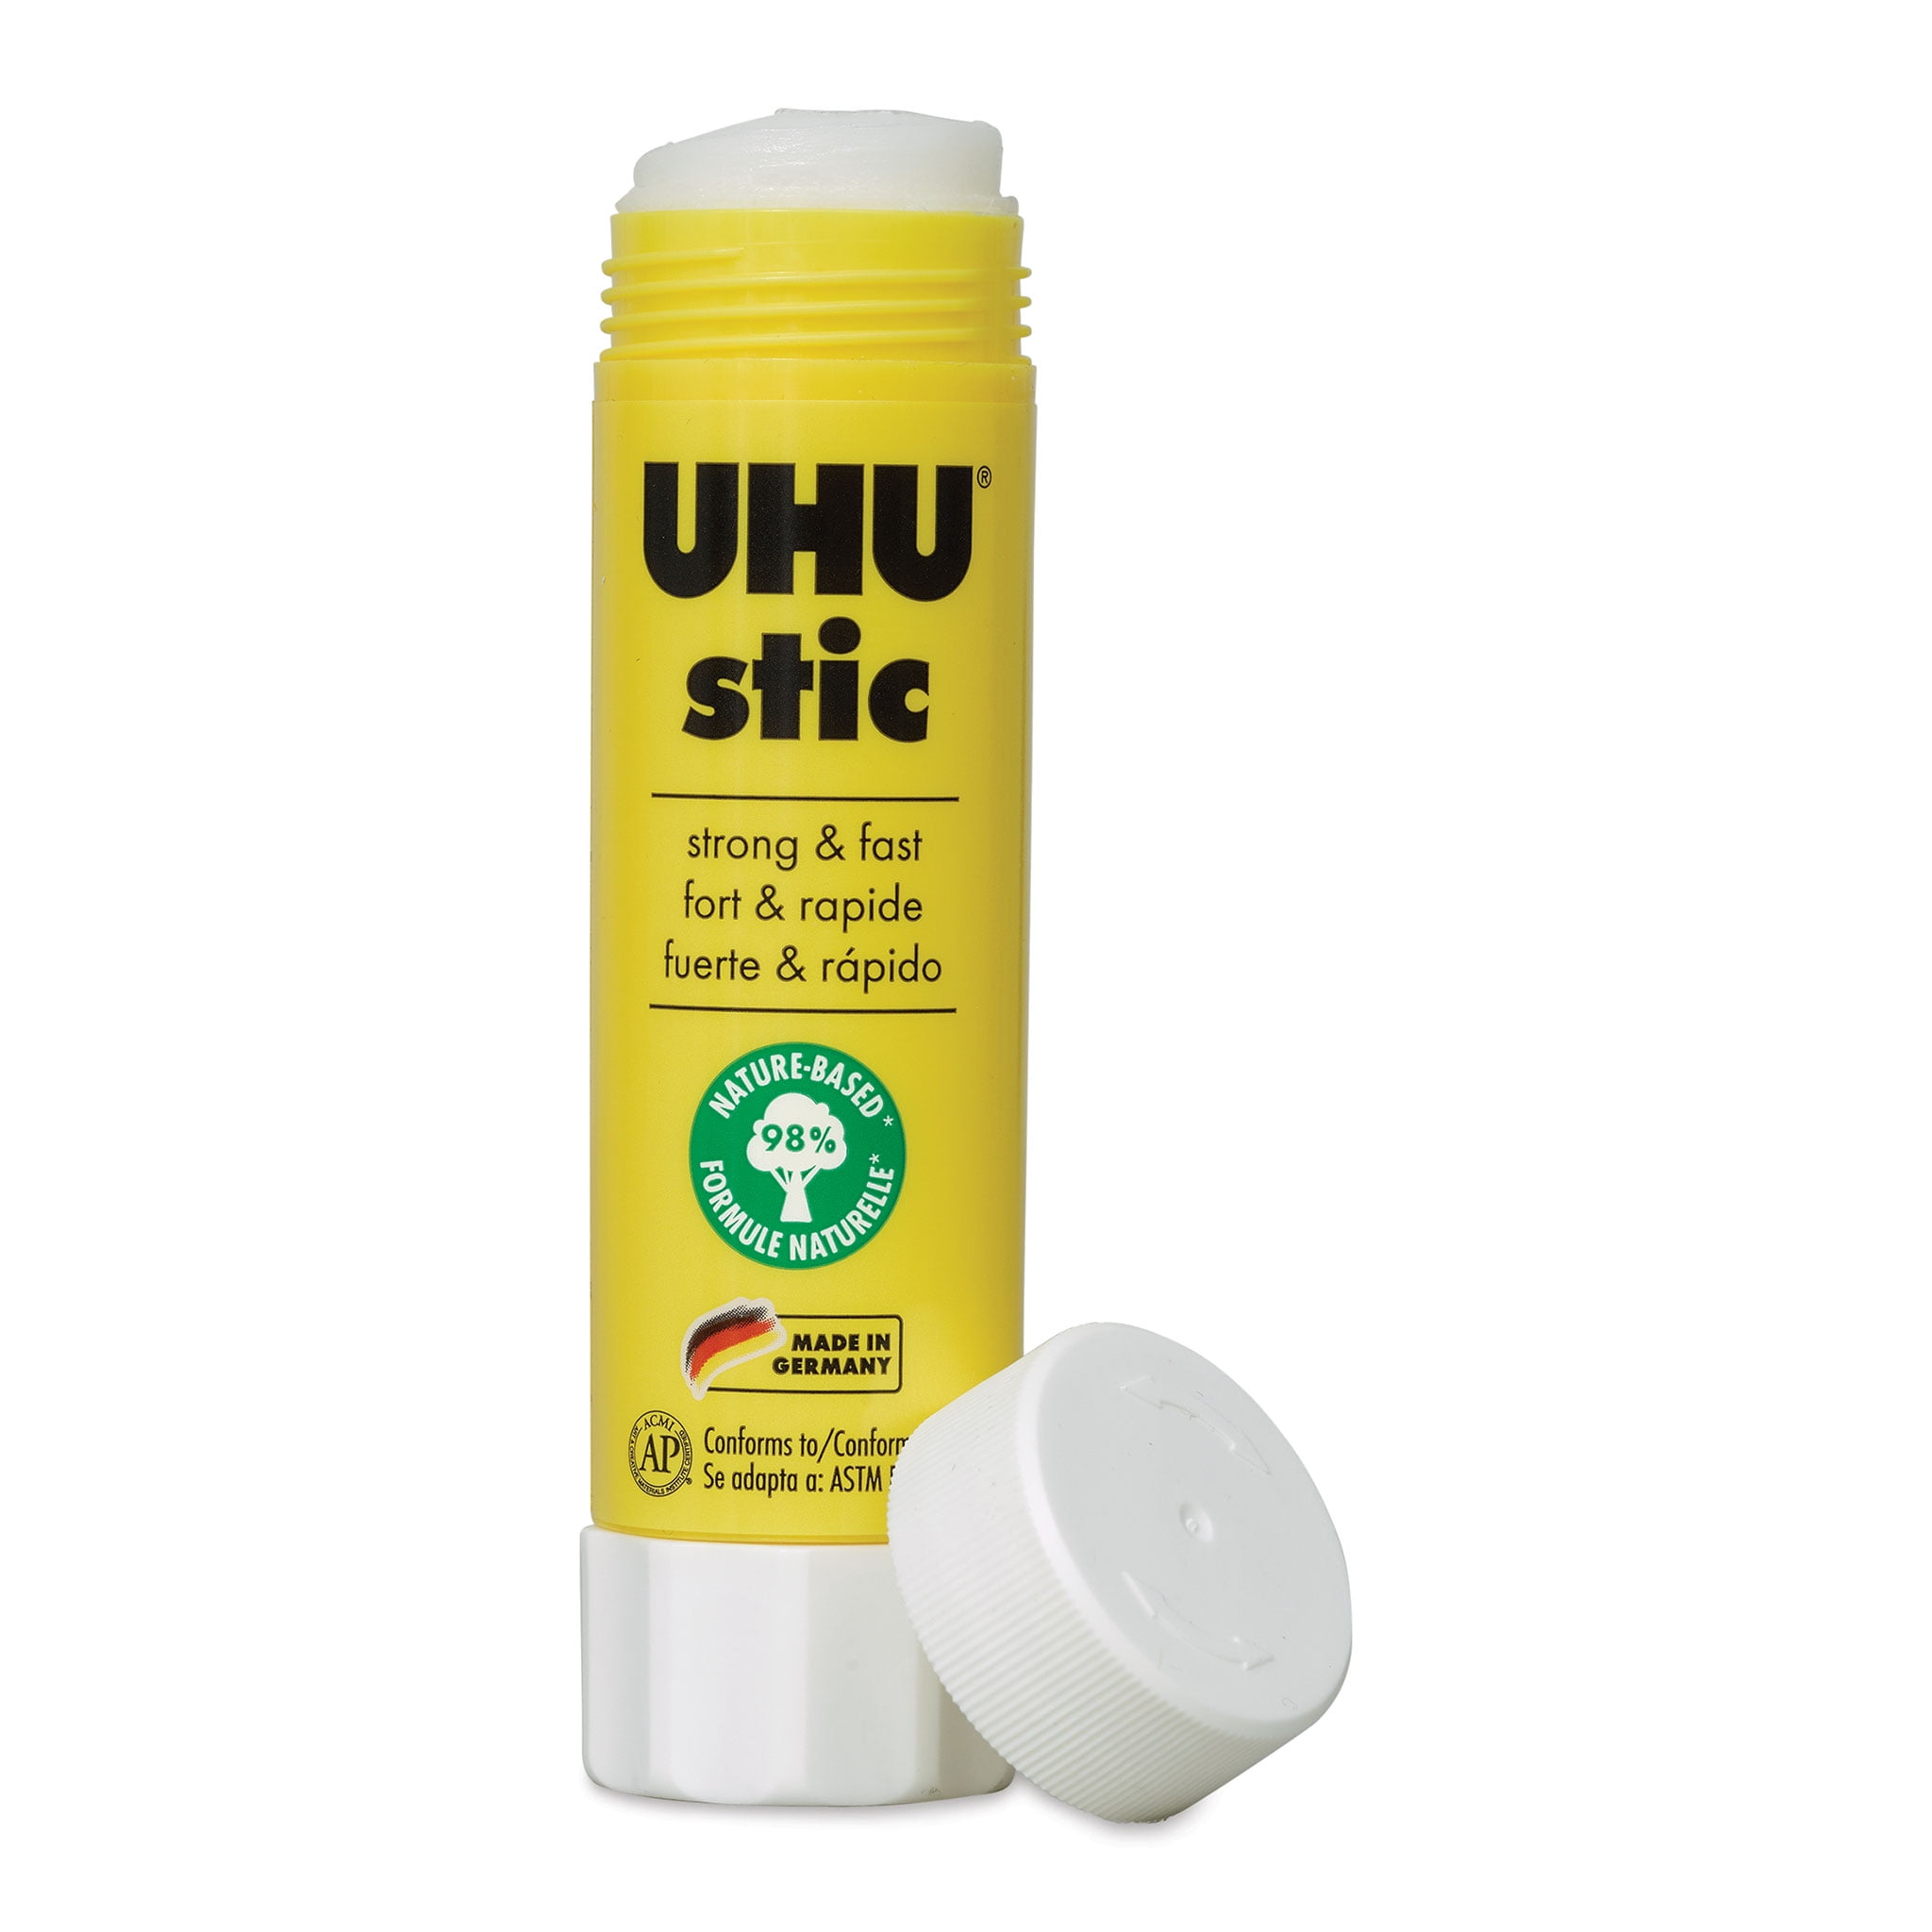 UHU stic, Glue Stick Without Solvent 5 x 40 g Blister, White